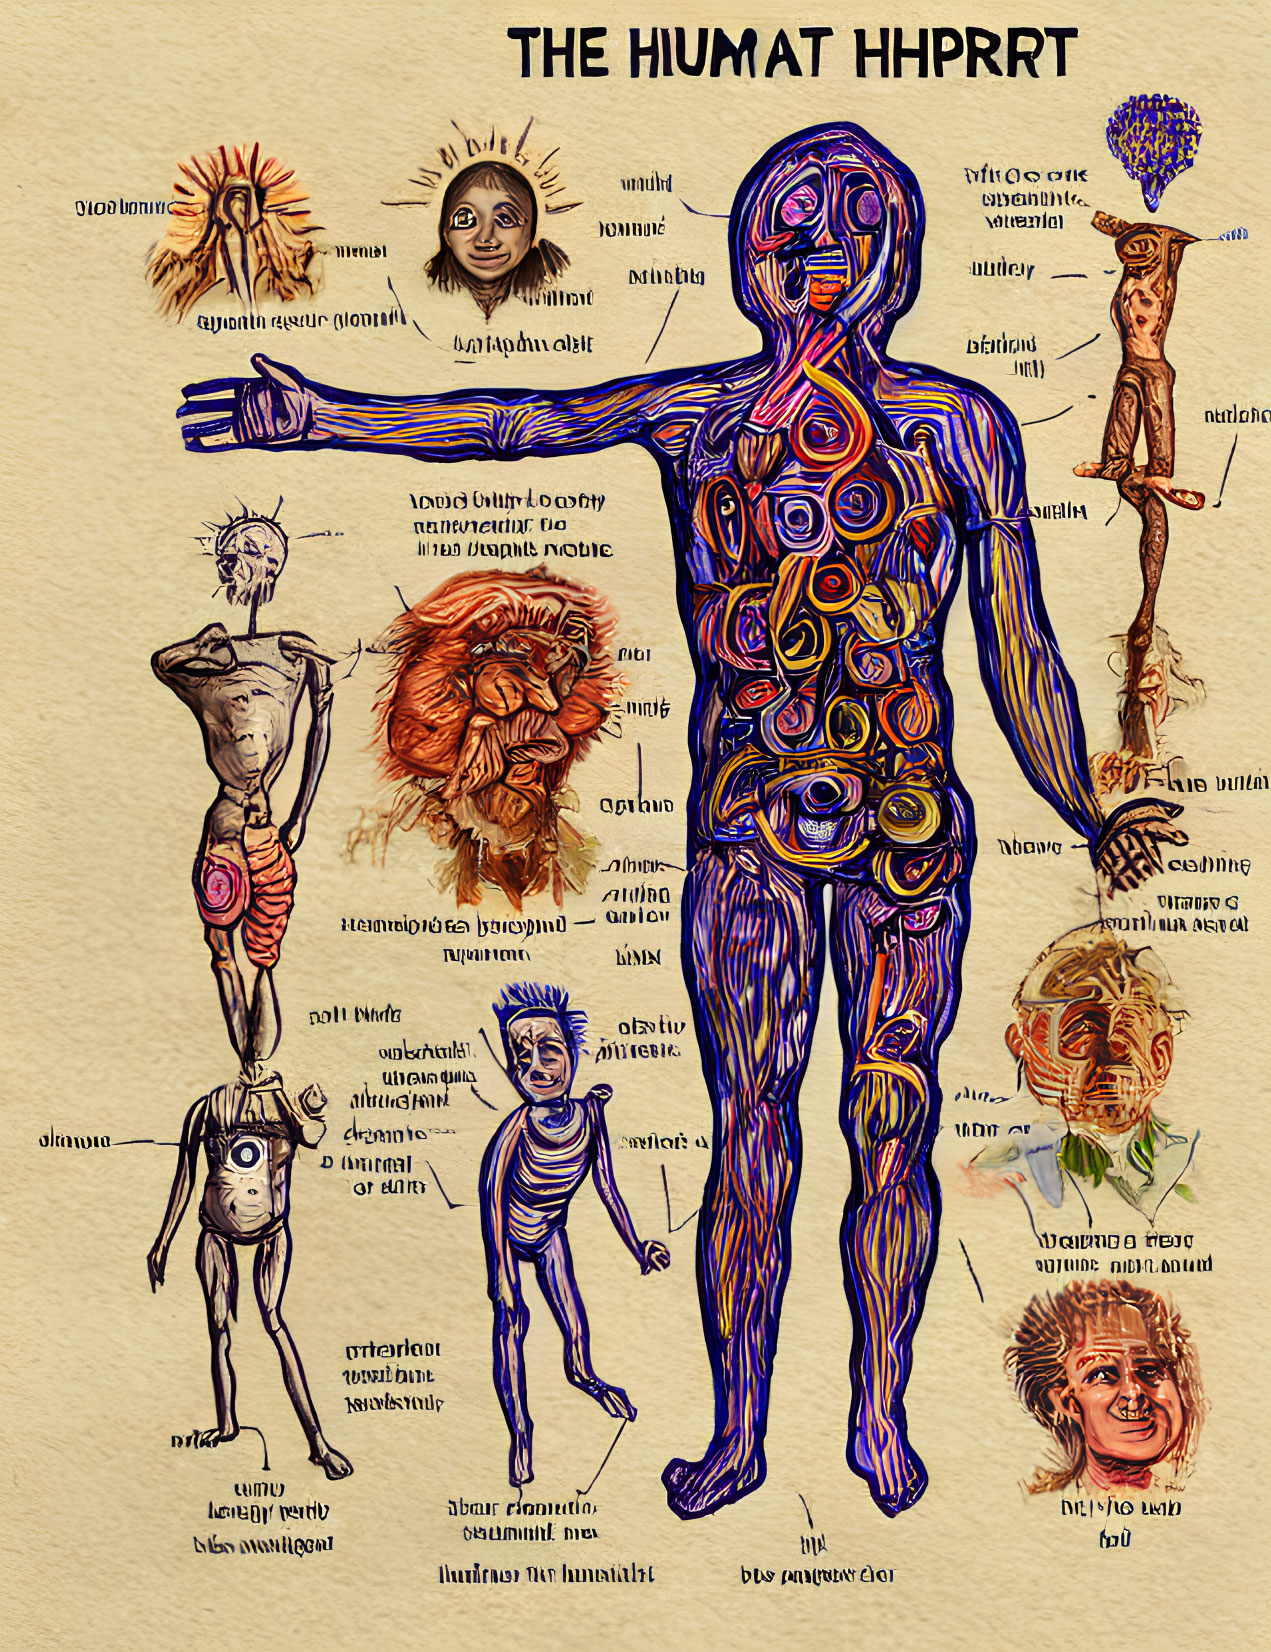 Colorful Abstract Human Anatomy Illustration with Labeled Body Parts